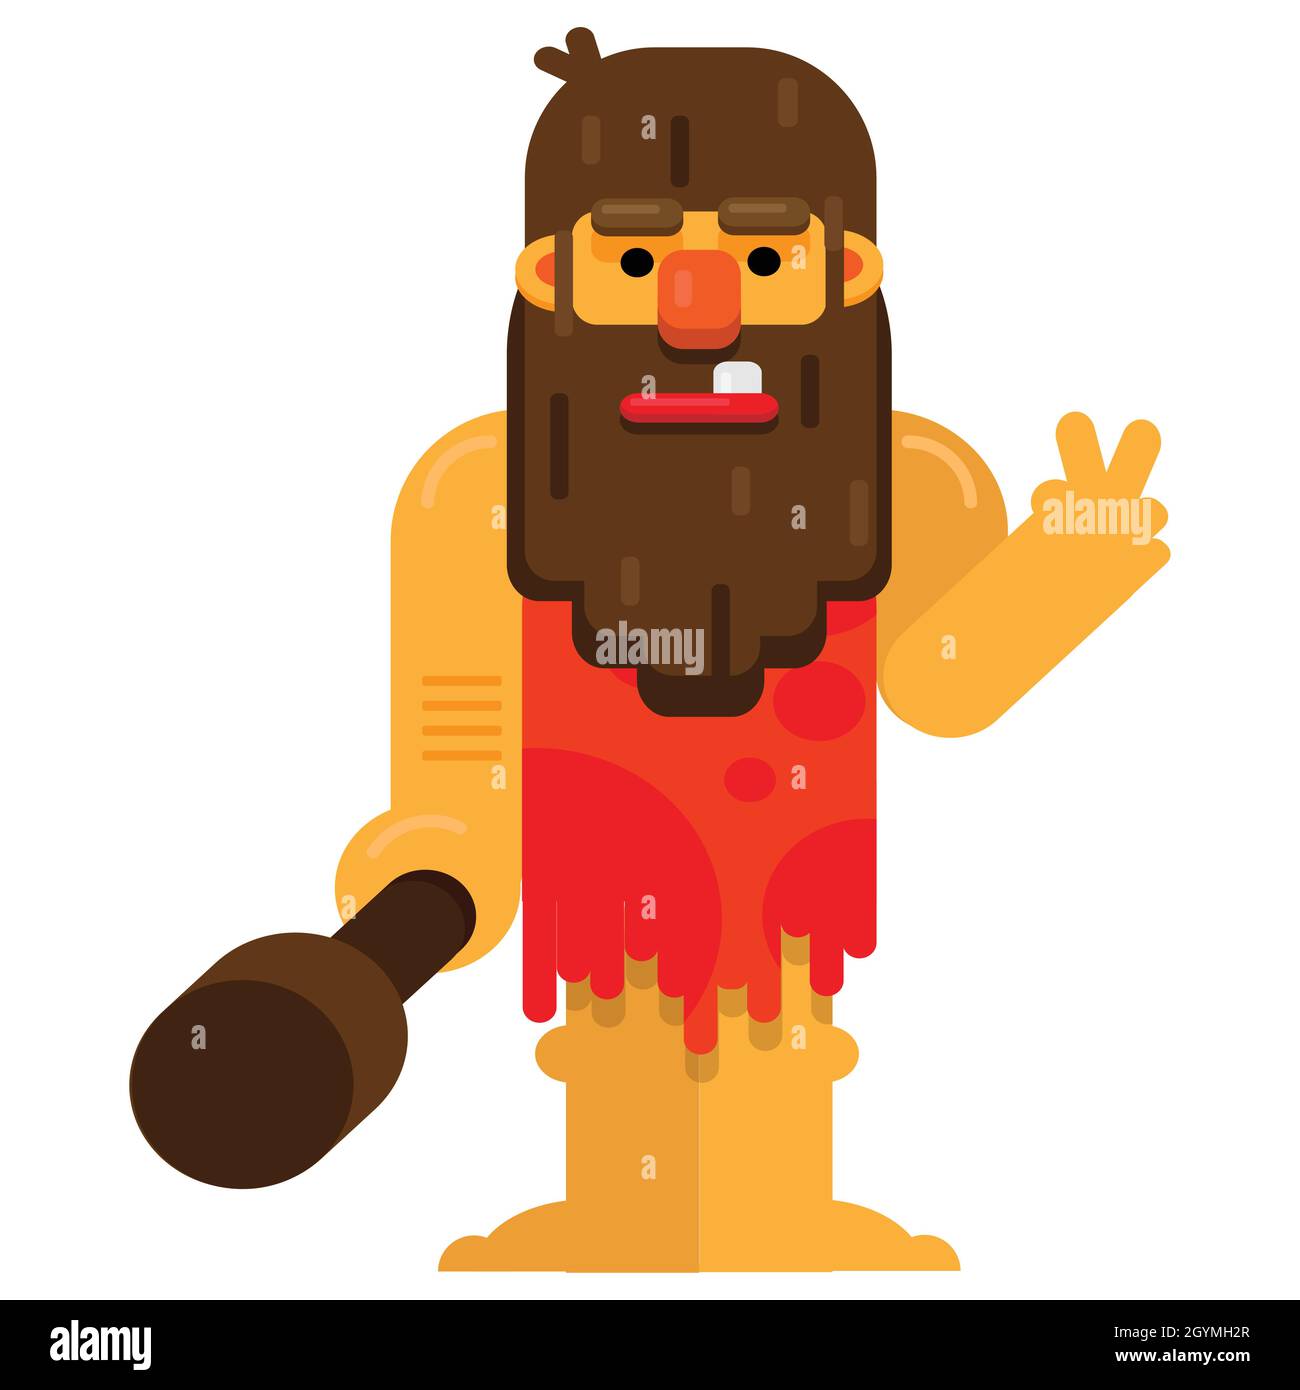 Caveman carrying a big club and showing victory sign. Flat style Vector illustration. Primitive archaic man isolated on white background. Stock Vector